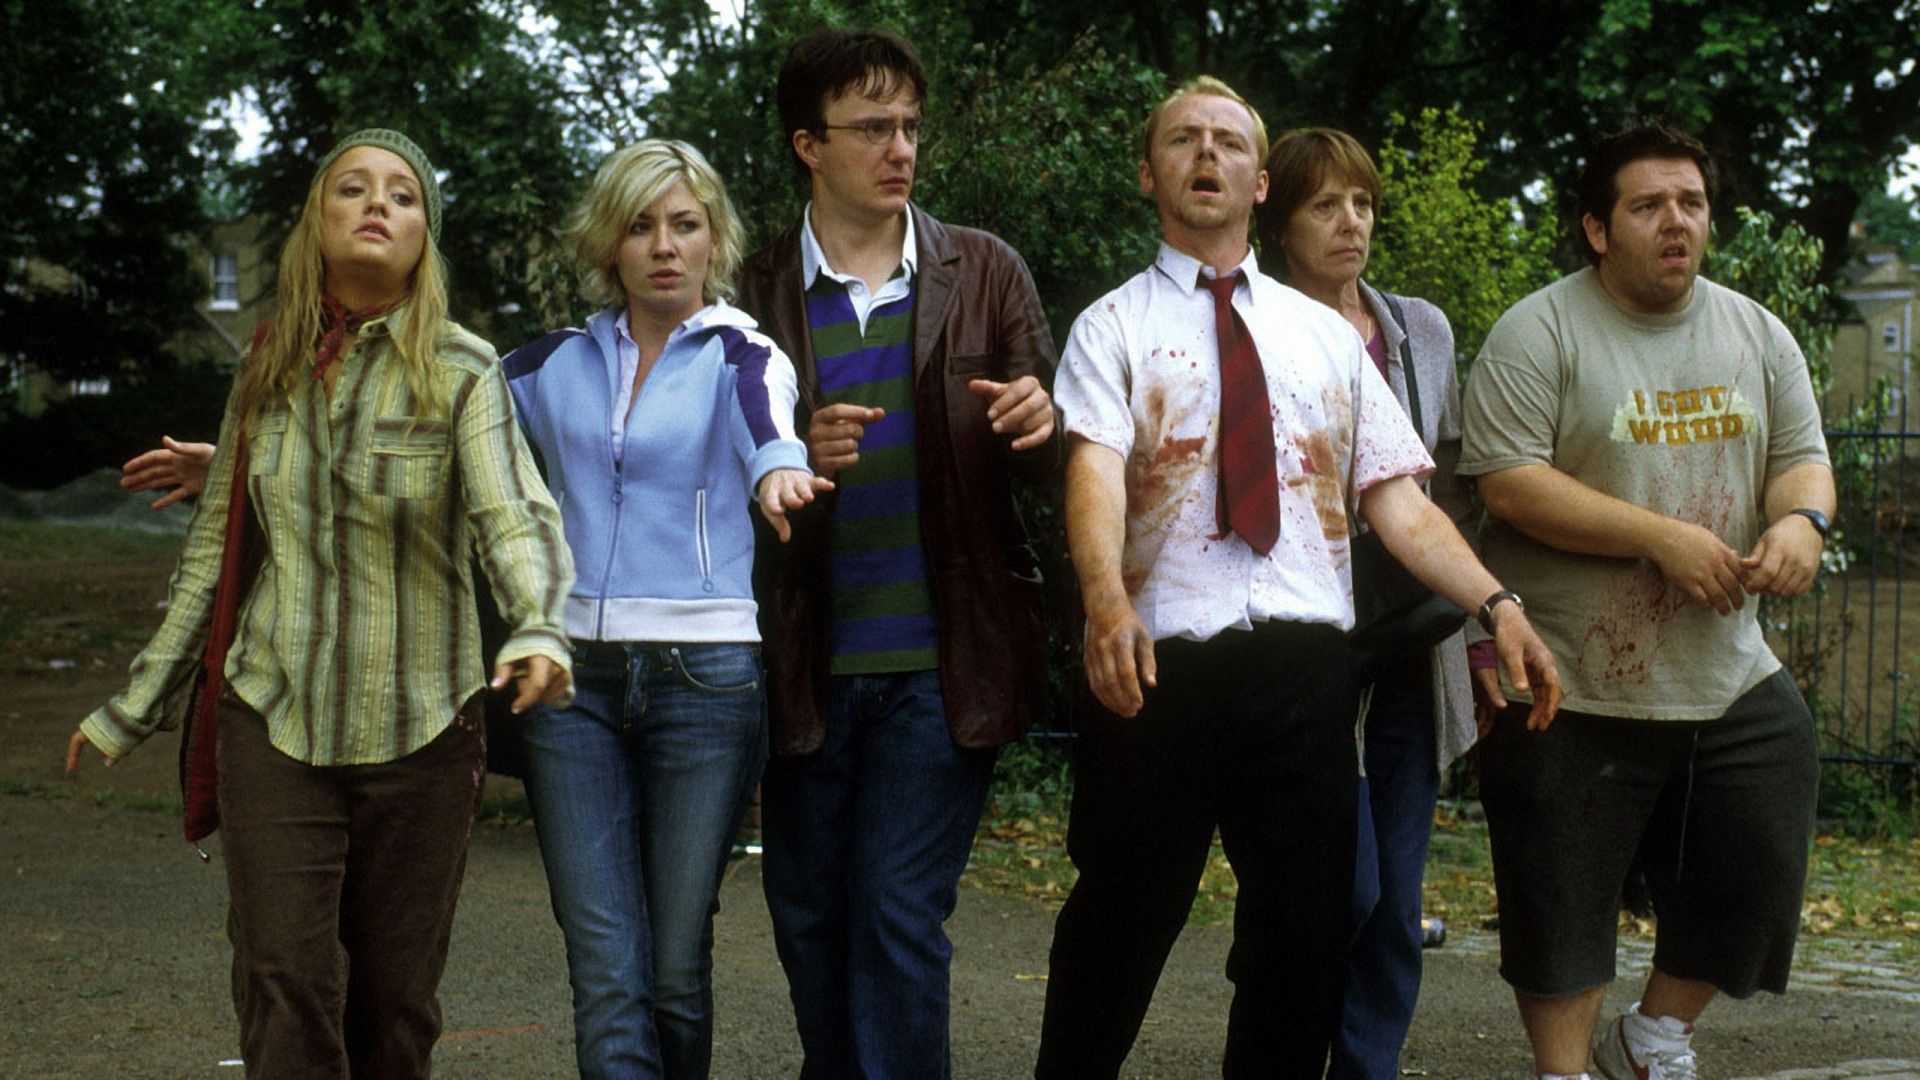 bella phillips recommends free shaun of the dead movie pic